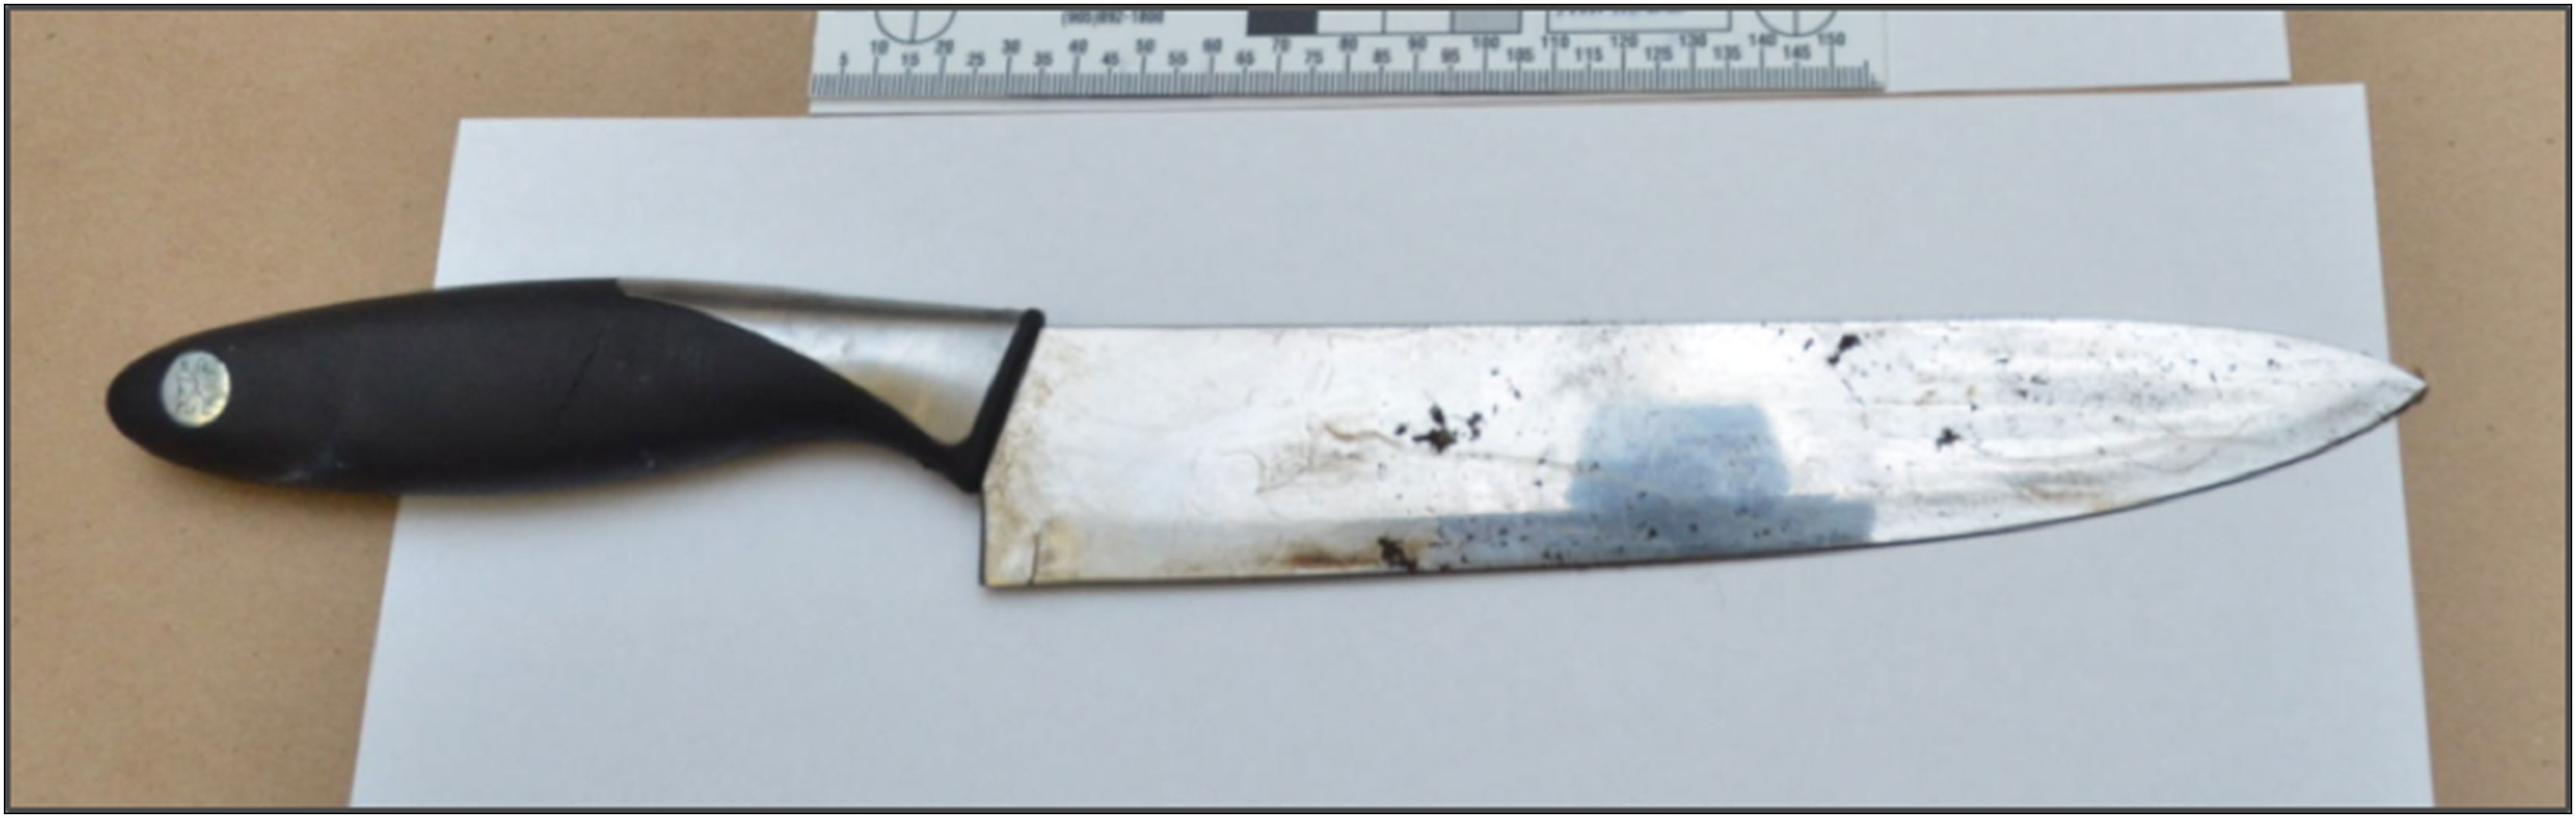 A photo of the knives seized